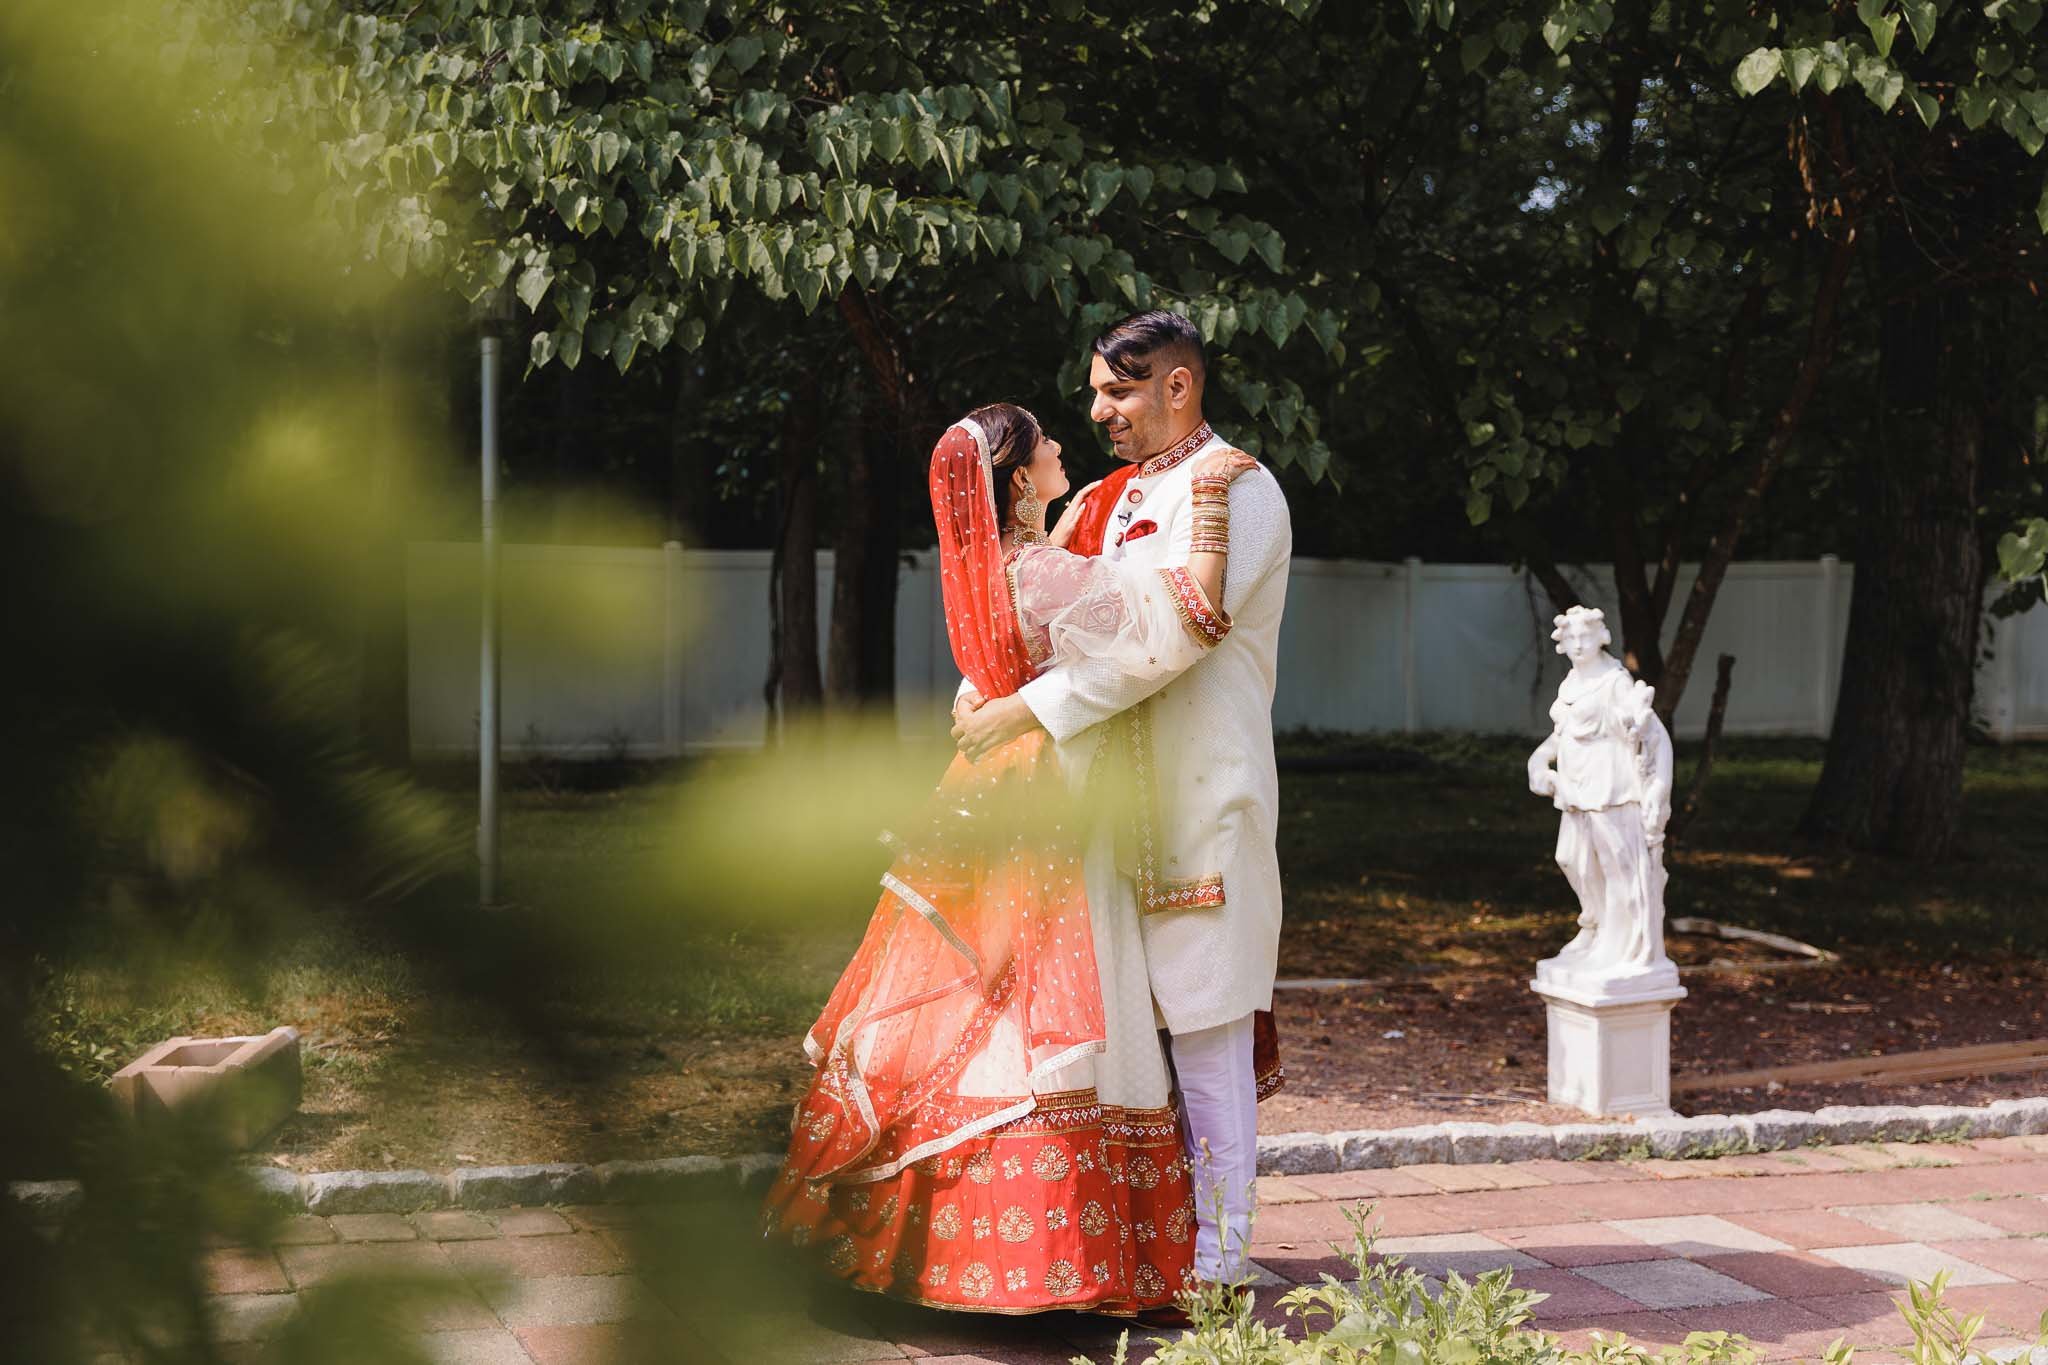  Artistic portrait on sunny day of Indian bride and groom 